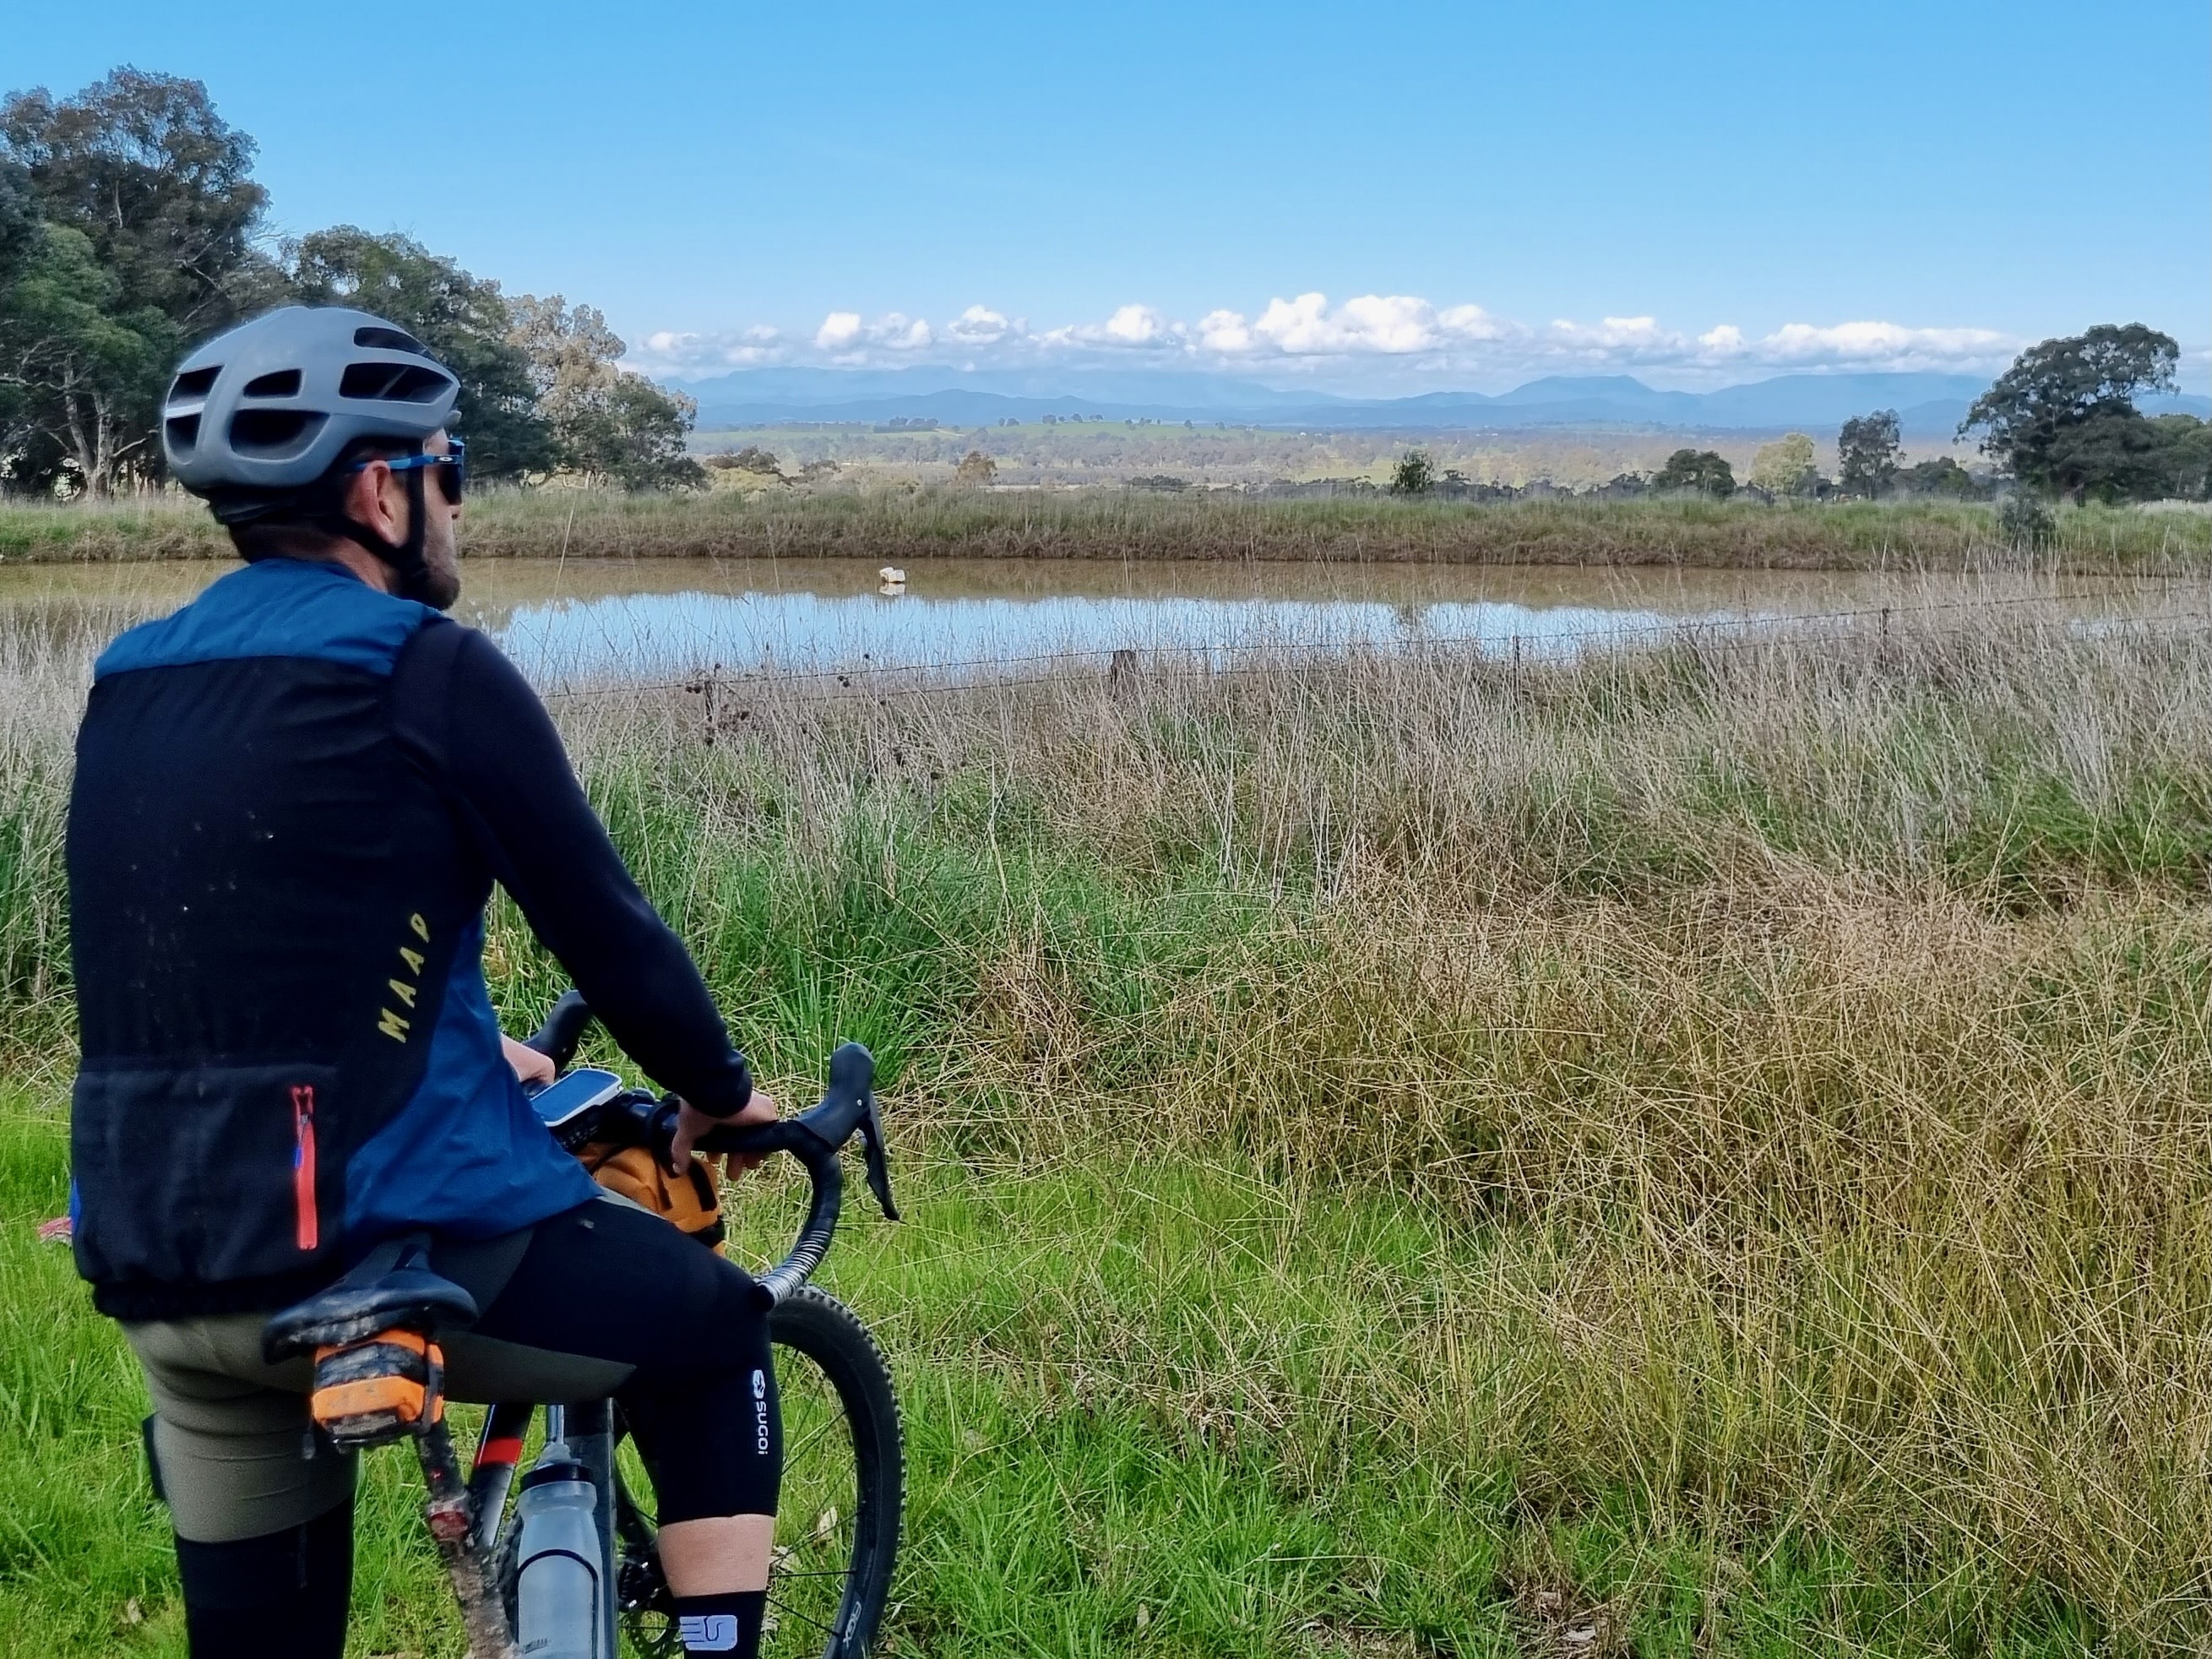 Cyclist stopped in front of dam looking at mountain range in the distance